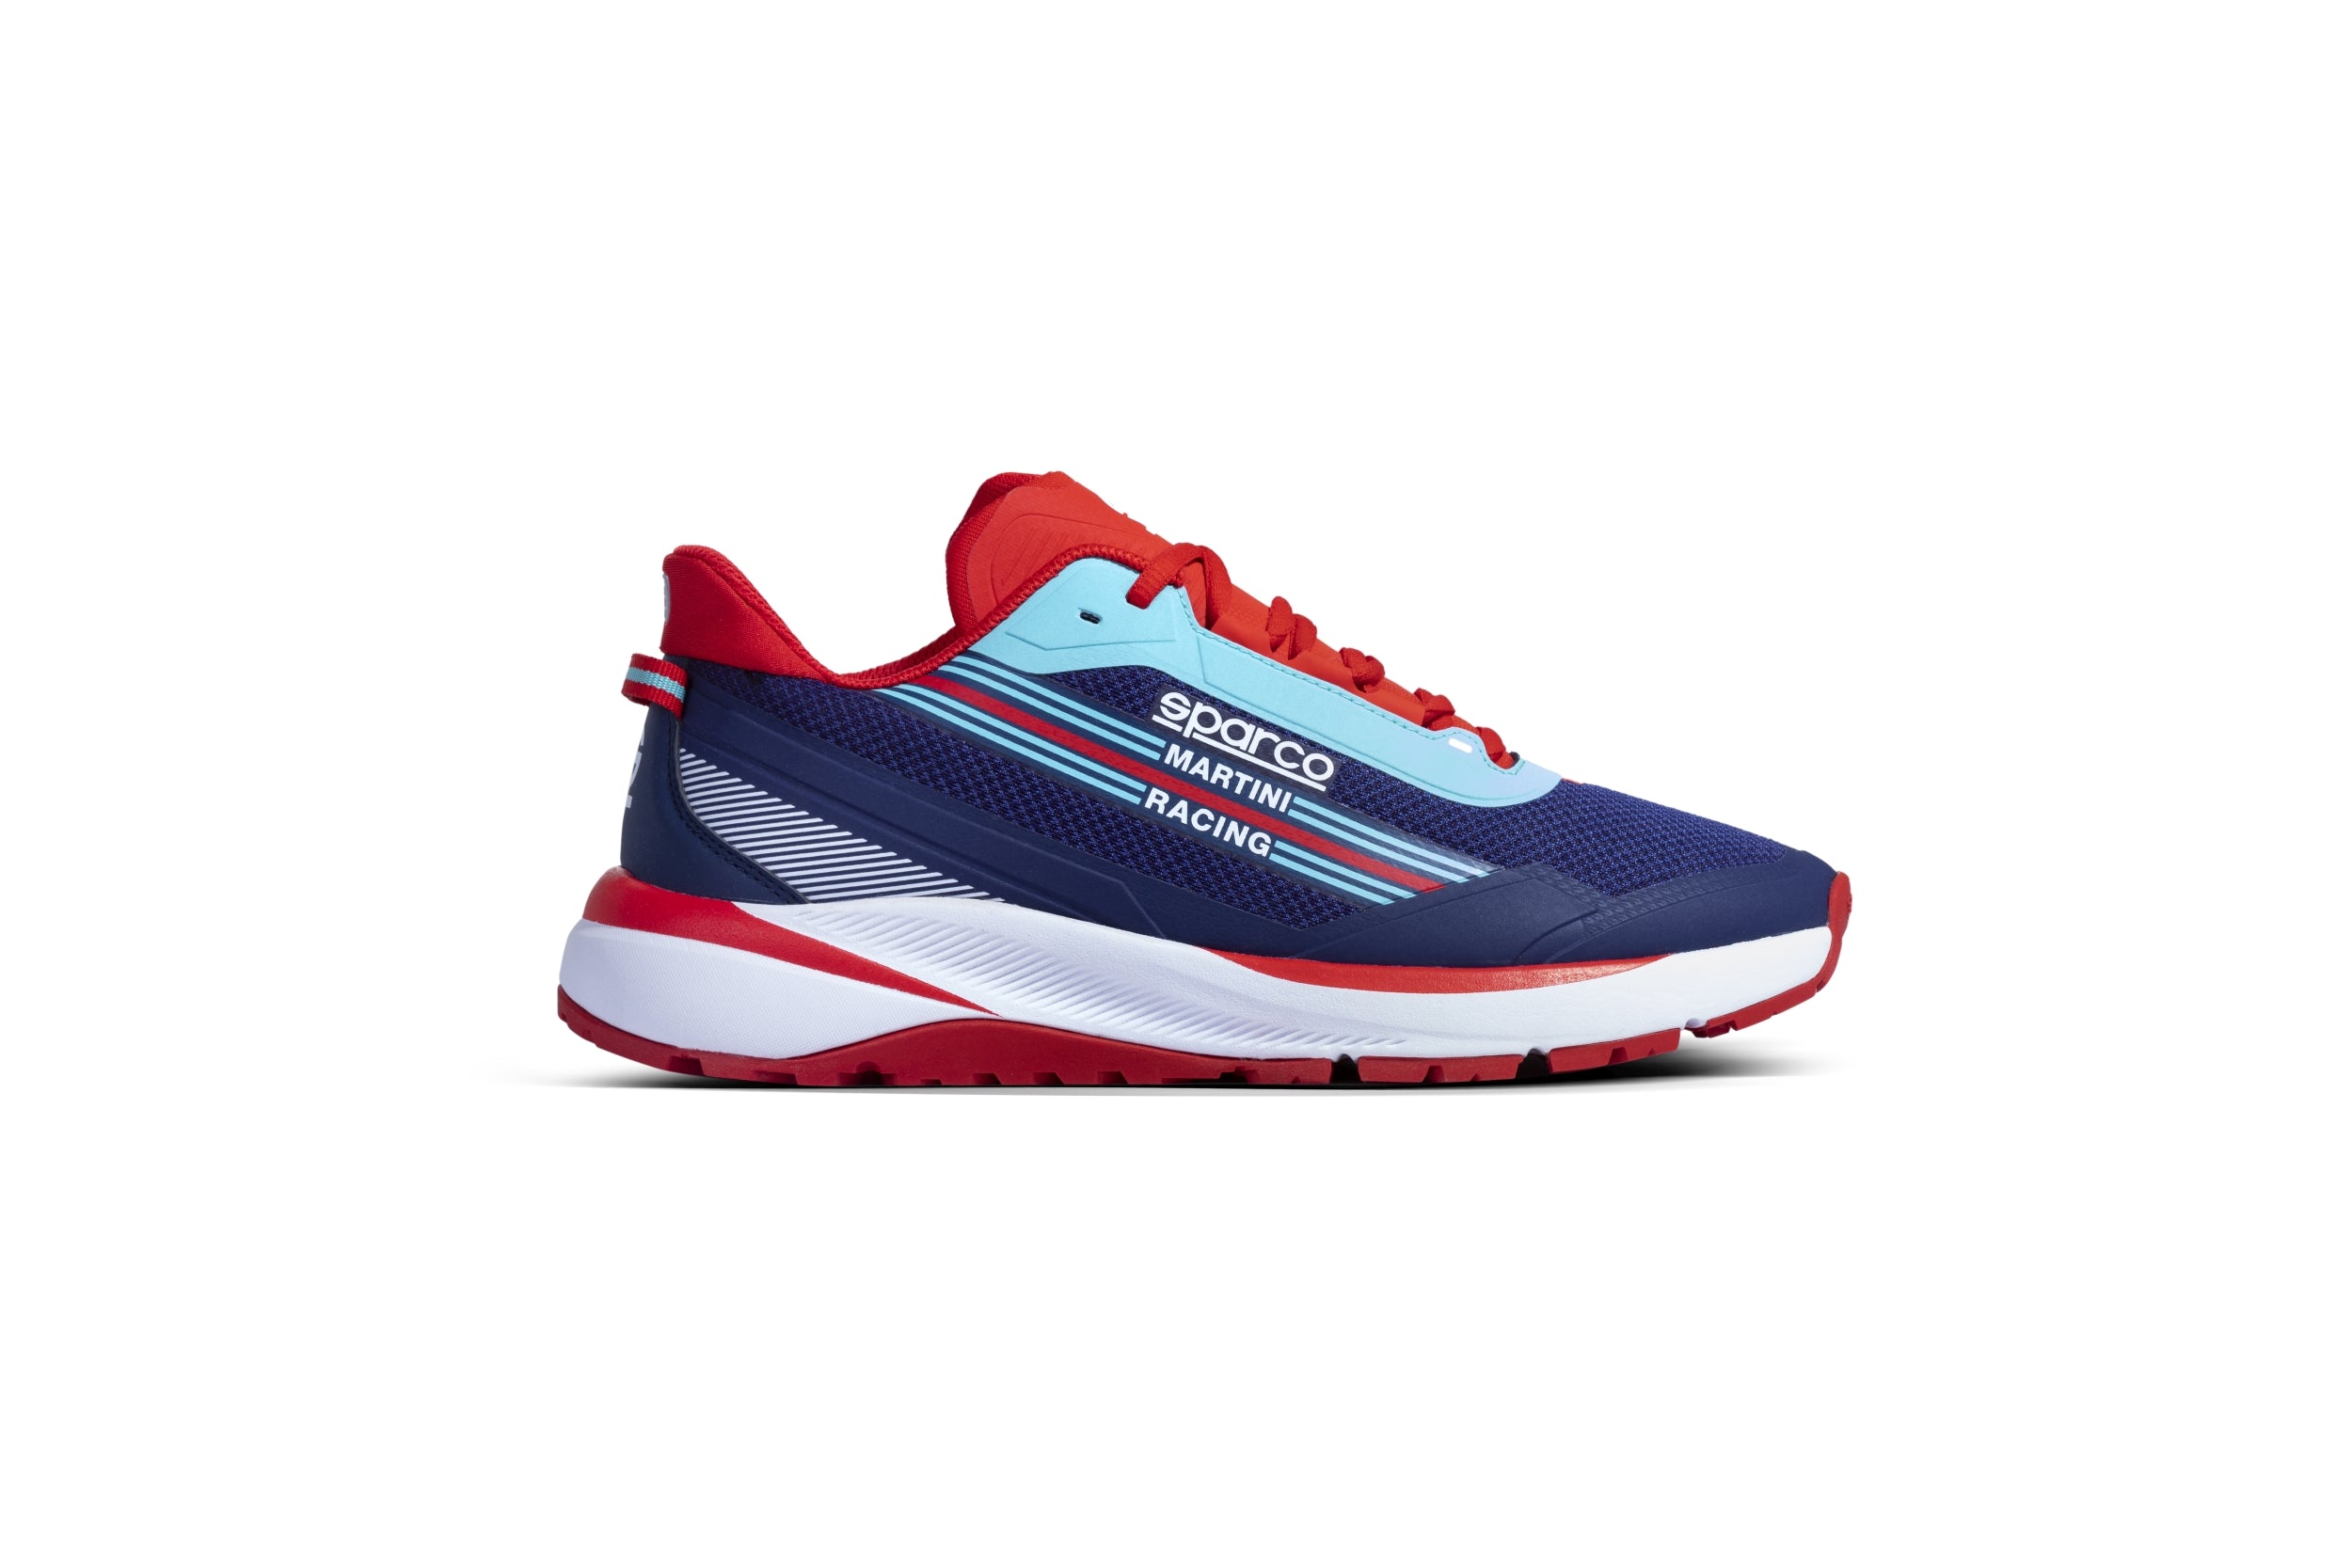 SPARCO 0012A5MR43BM S-RUN MARTINI RACING Sneakers Shoes, navy blue, size 43 Photo-2 